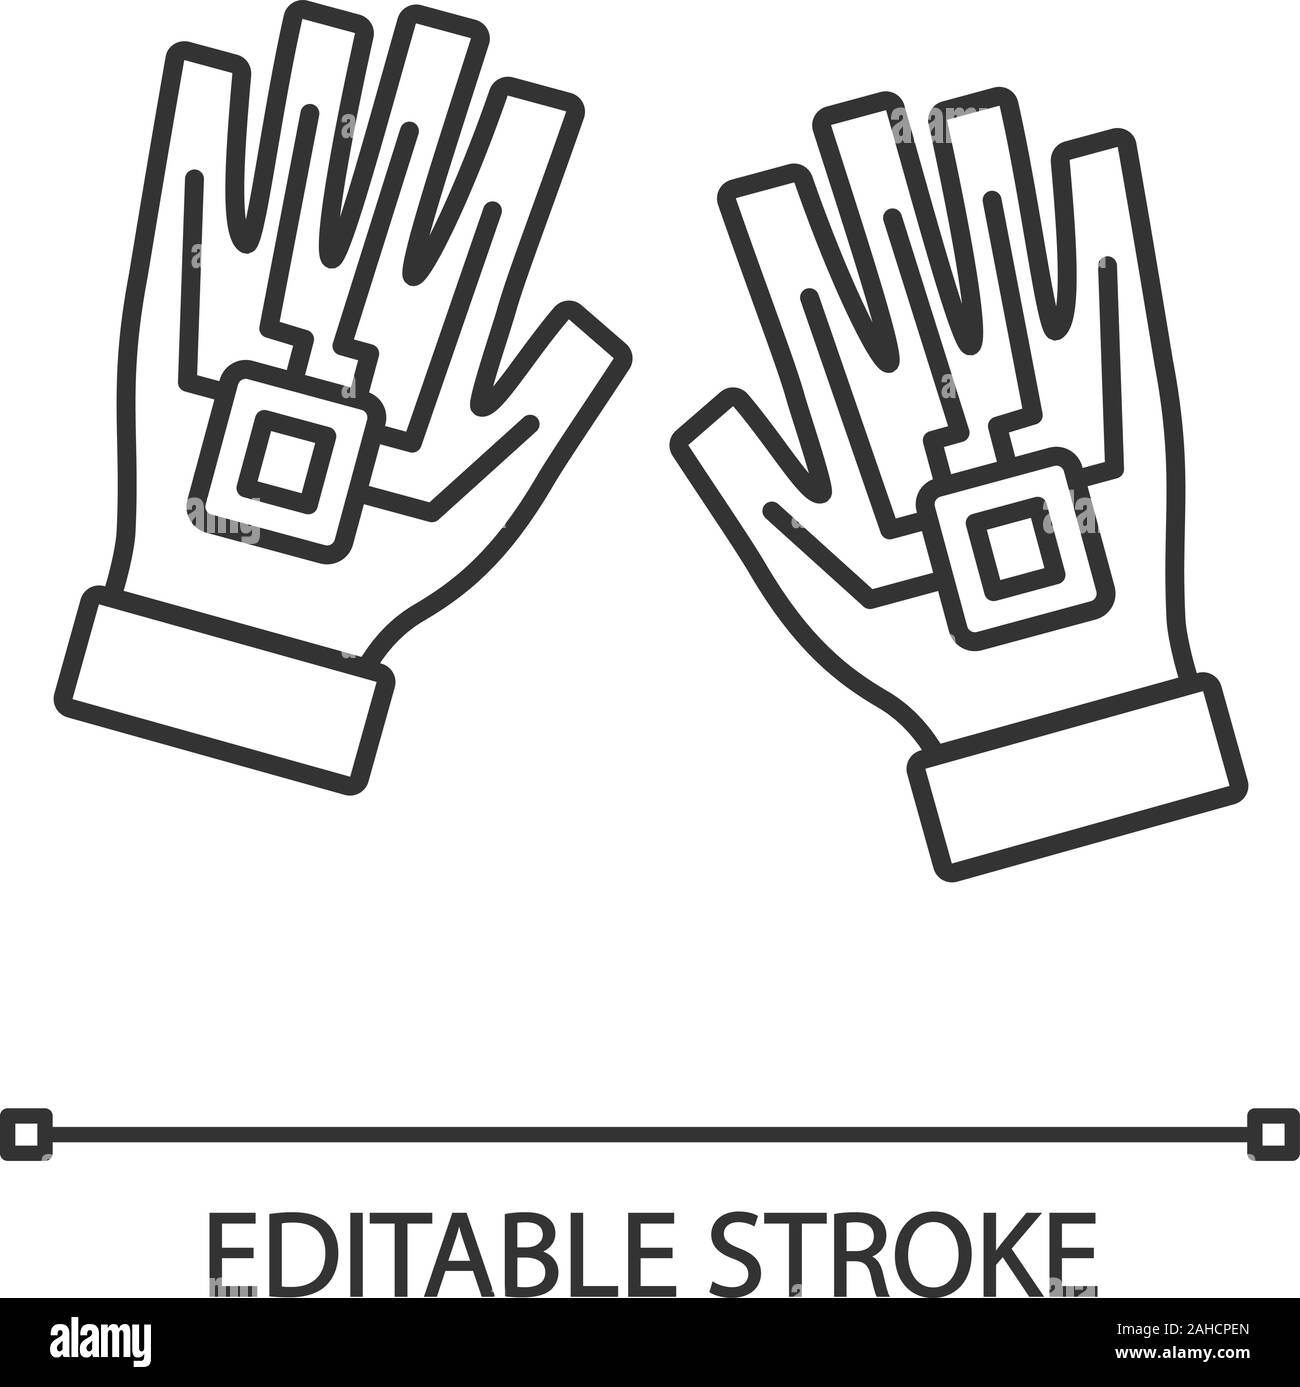 VR gloves linear icon. Thin line illustration. Haptic, wired gloves ...